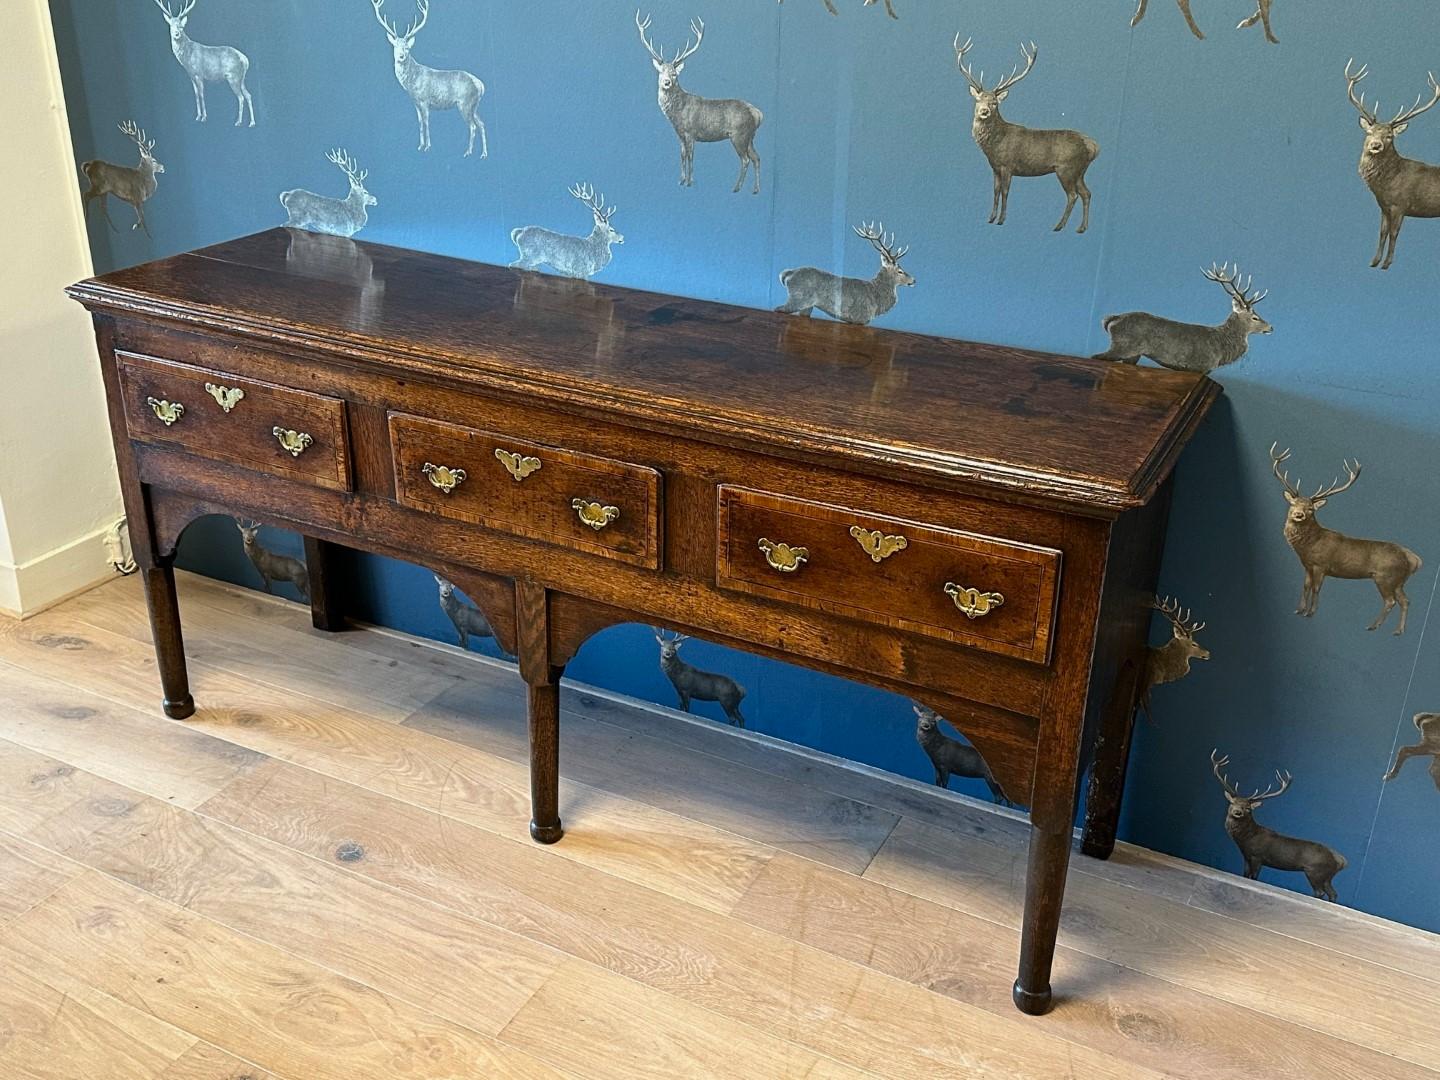 Beautiful 3 Drawer English Oak Dresser Base, antique server, antique sideboard. Table is early 18th century, ca. 1720. Completely in original and good condition. The table has a beautiful patina and appearance. Original drawer pulls. Great